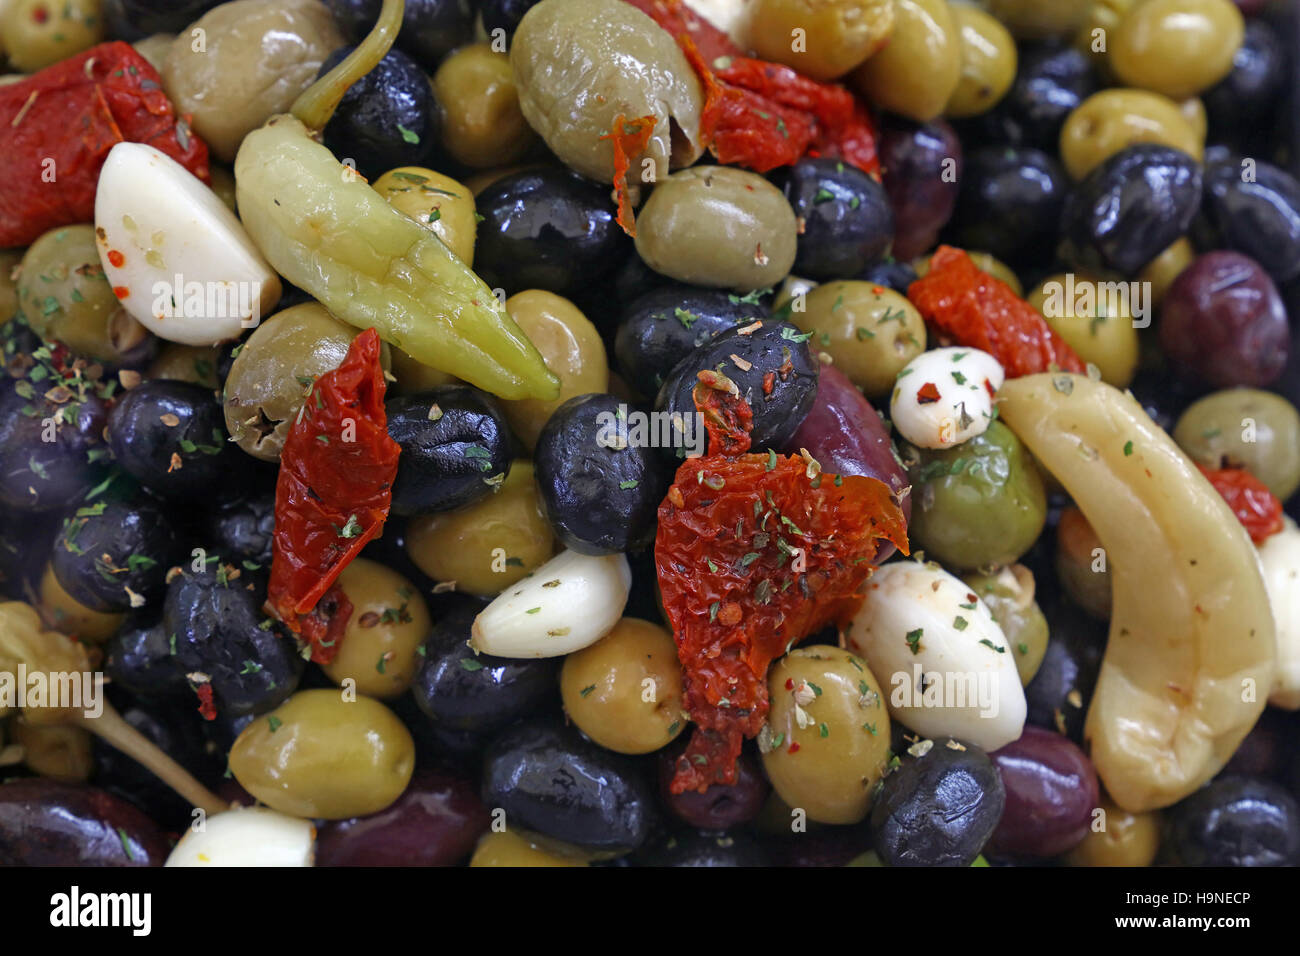 Mediterranean salad mix of assorted whole Italian olives (black, green, red) with garlic, hot pepper and sundried tomato in oil close up, elevated hig Stock Photo